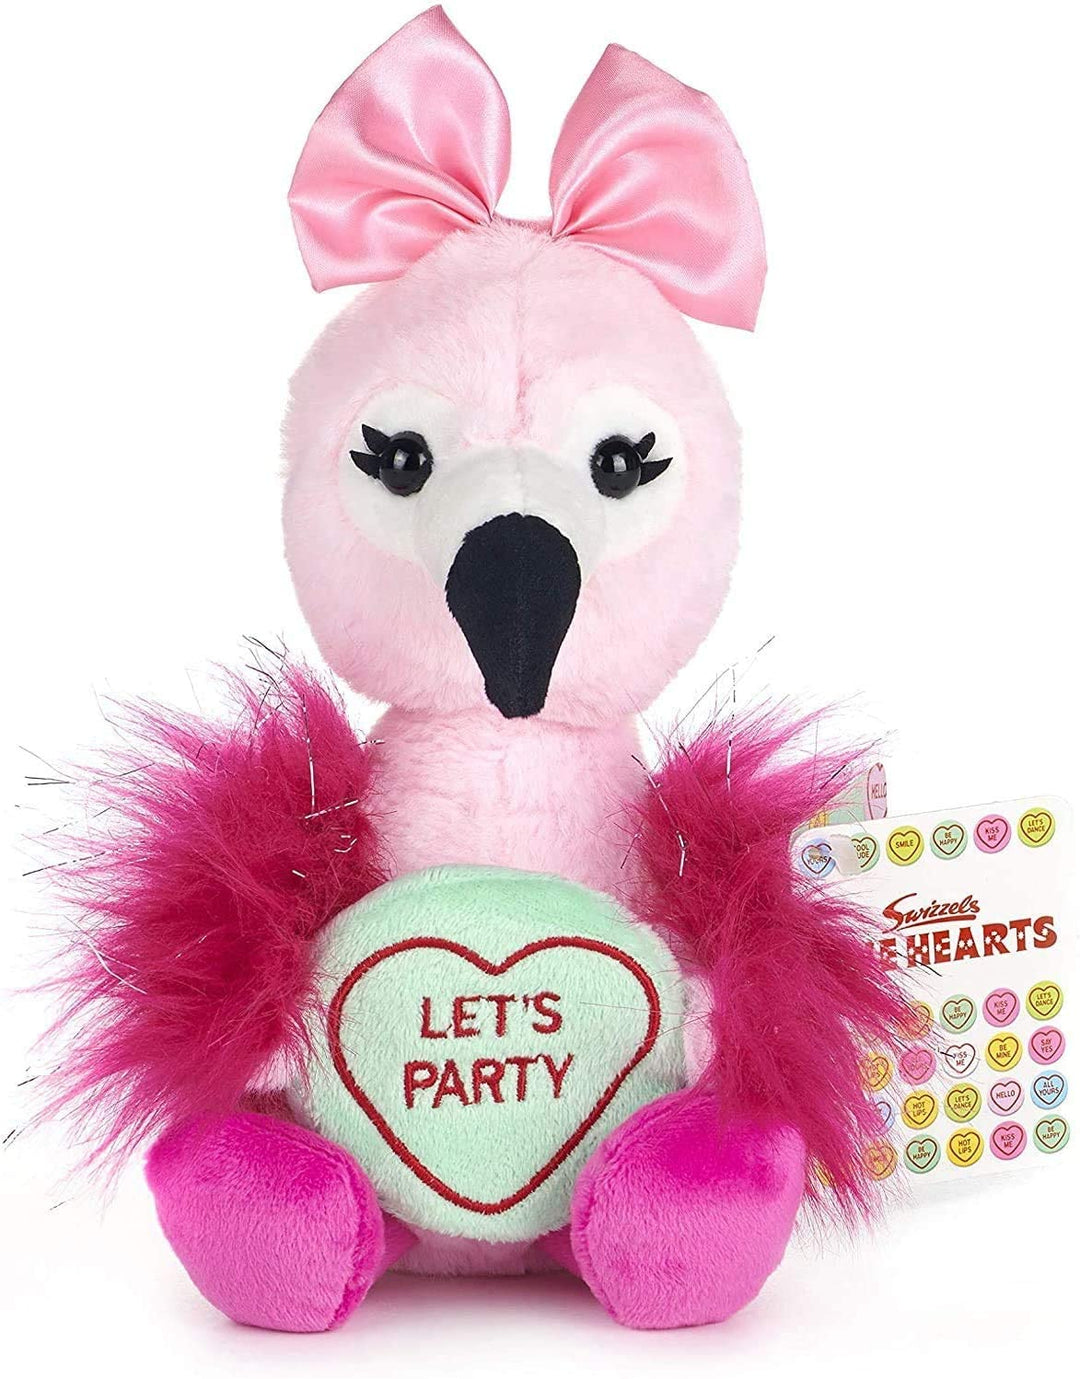 Posh Paws 37330 Swizzels Love Hearts 18cm (7”) Flamingo – Let&#39;s Party Message Stofftier, Pink